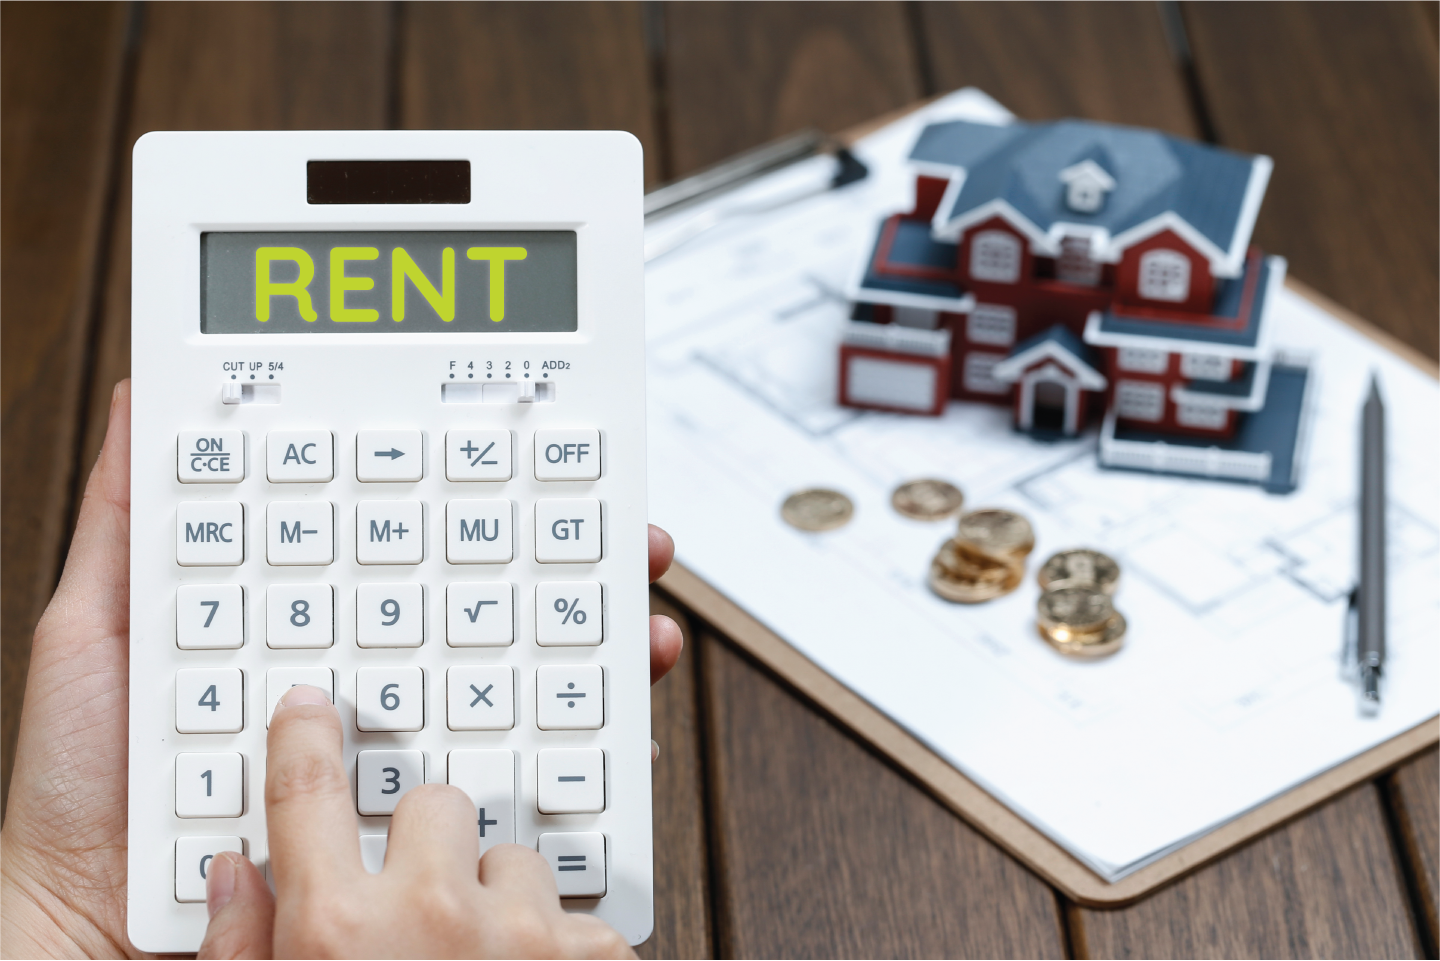 Monthly Rent Calculator: How to calculate monthly rent!